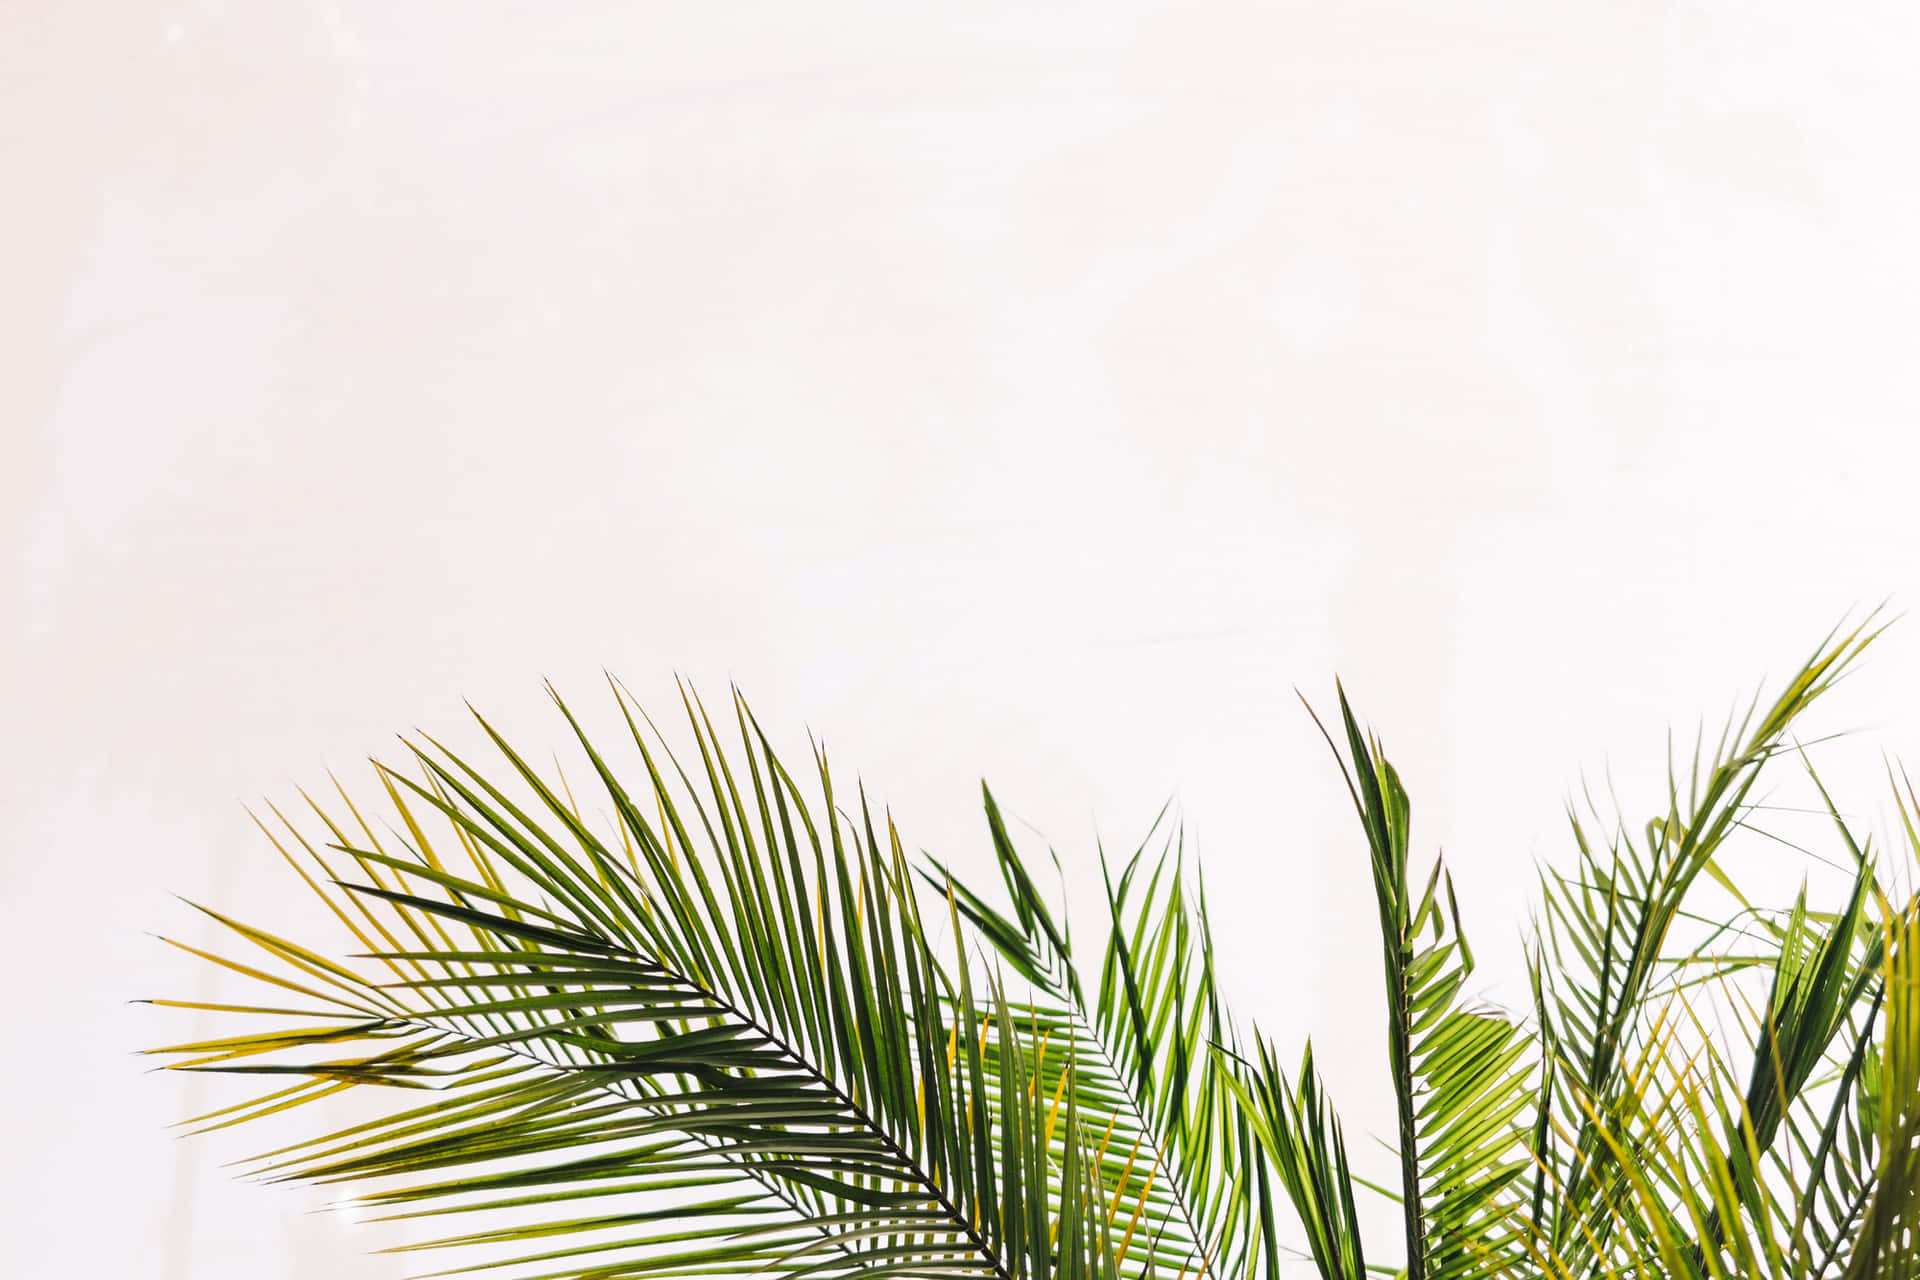 Tropical Palm Fronds Against White Background.jpg Wallpaper